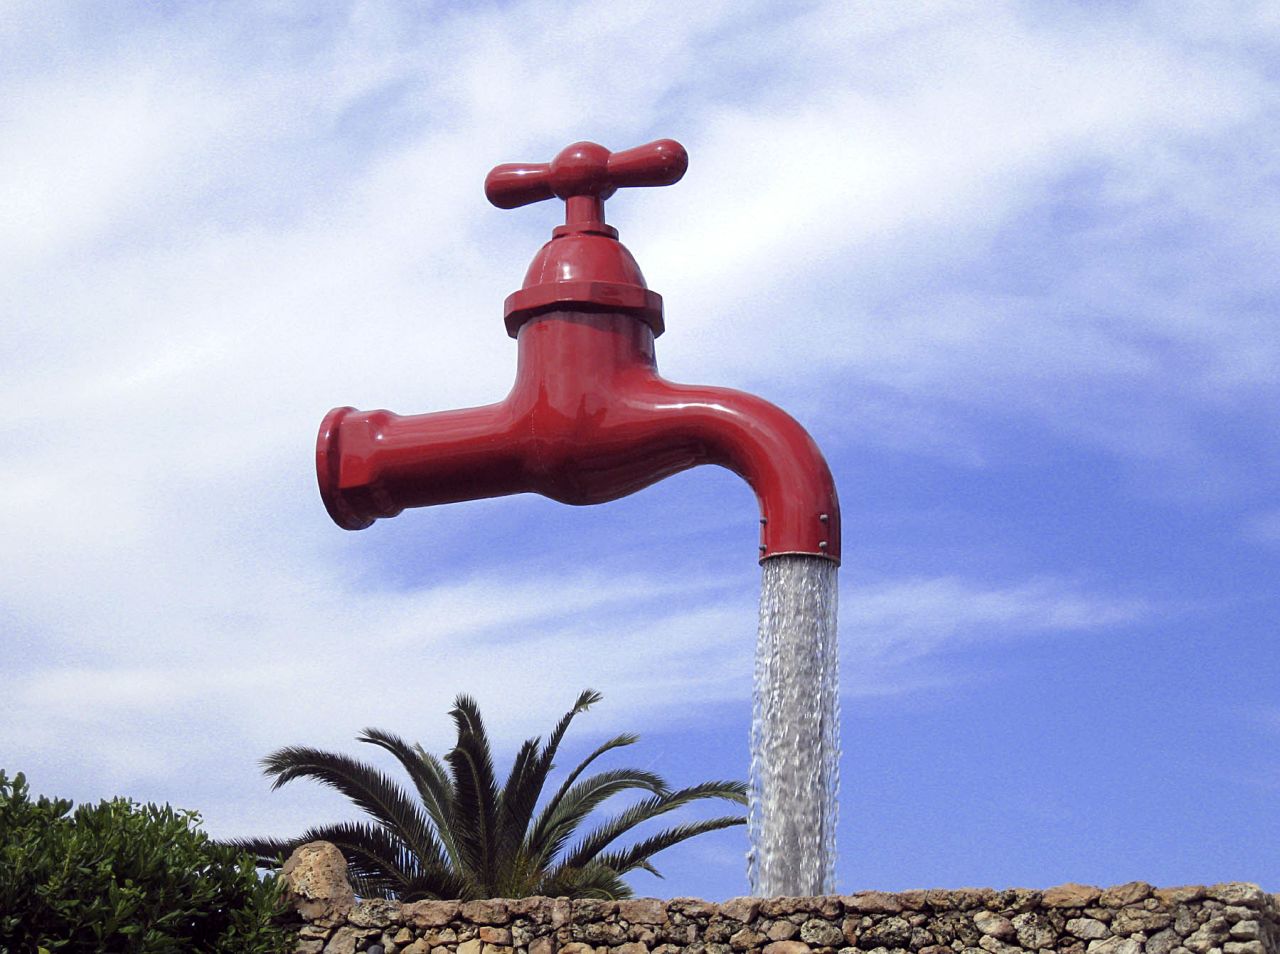 This floating tap can be found on the Spanish island of Menorca. The thick jet of water conceals the support and water pipes of the installation, making it appear to float in midair.